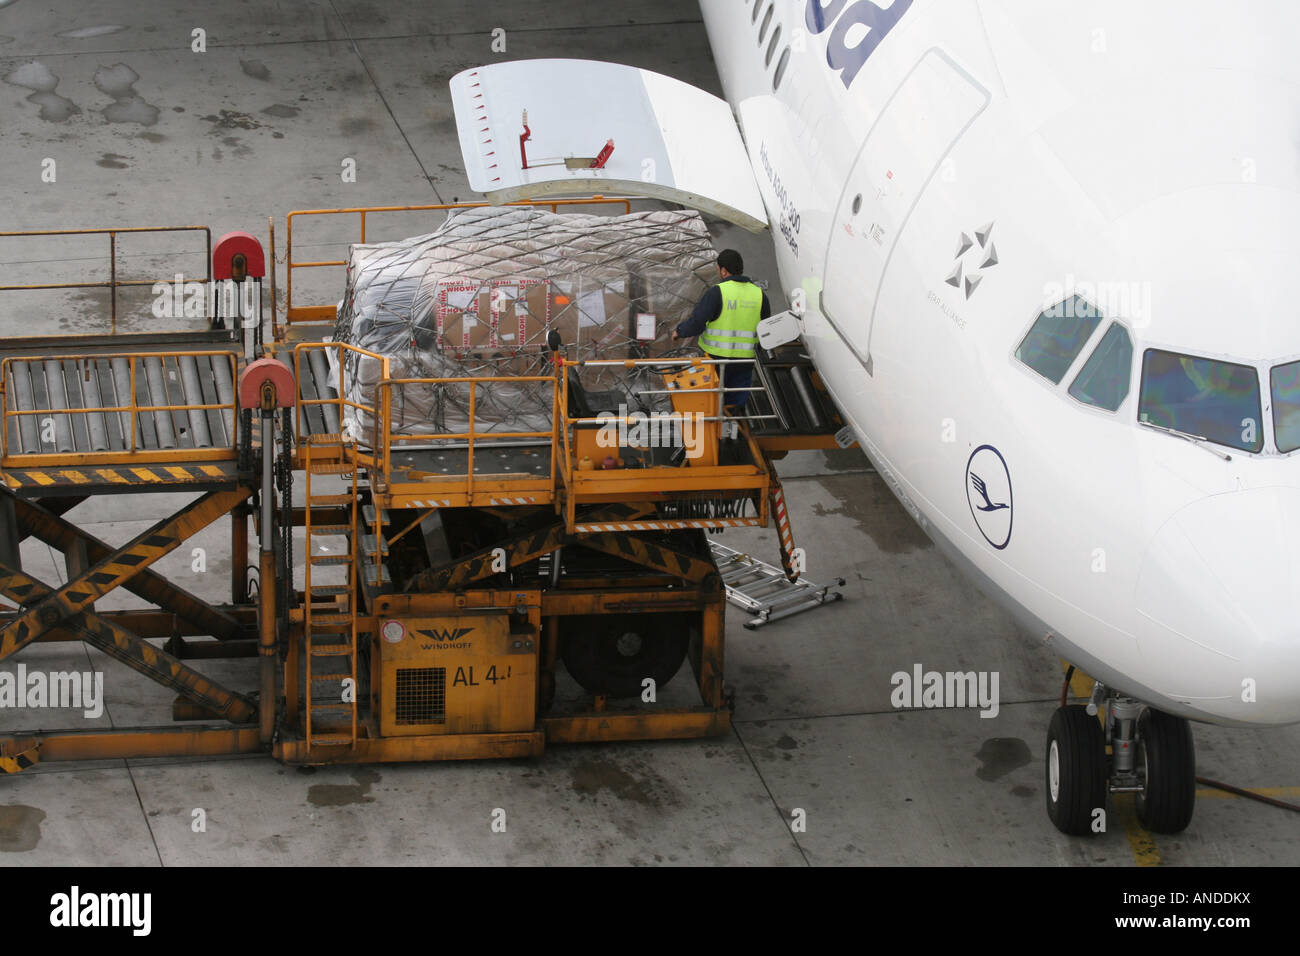 Loading air cargo on board a commercial jet plane. International freight transport services networks and global supply chains. Stock Photo